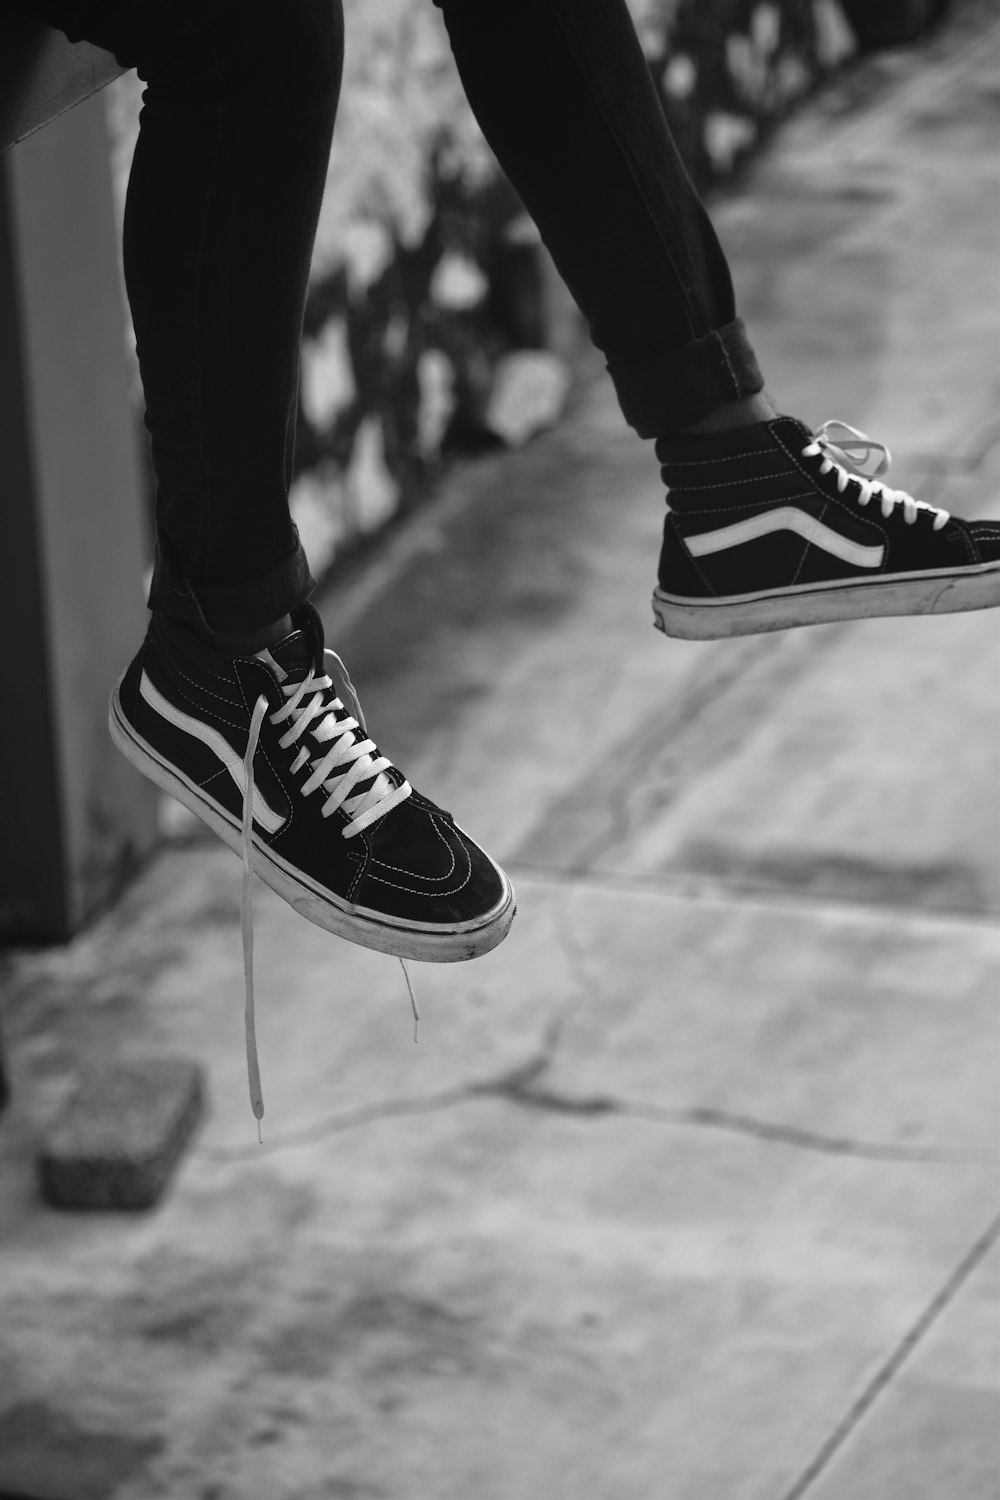 Person wearing black and white vans low top sneakers photo – Free  Trivandrum Image on Unsplash